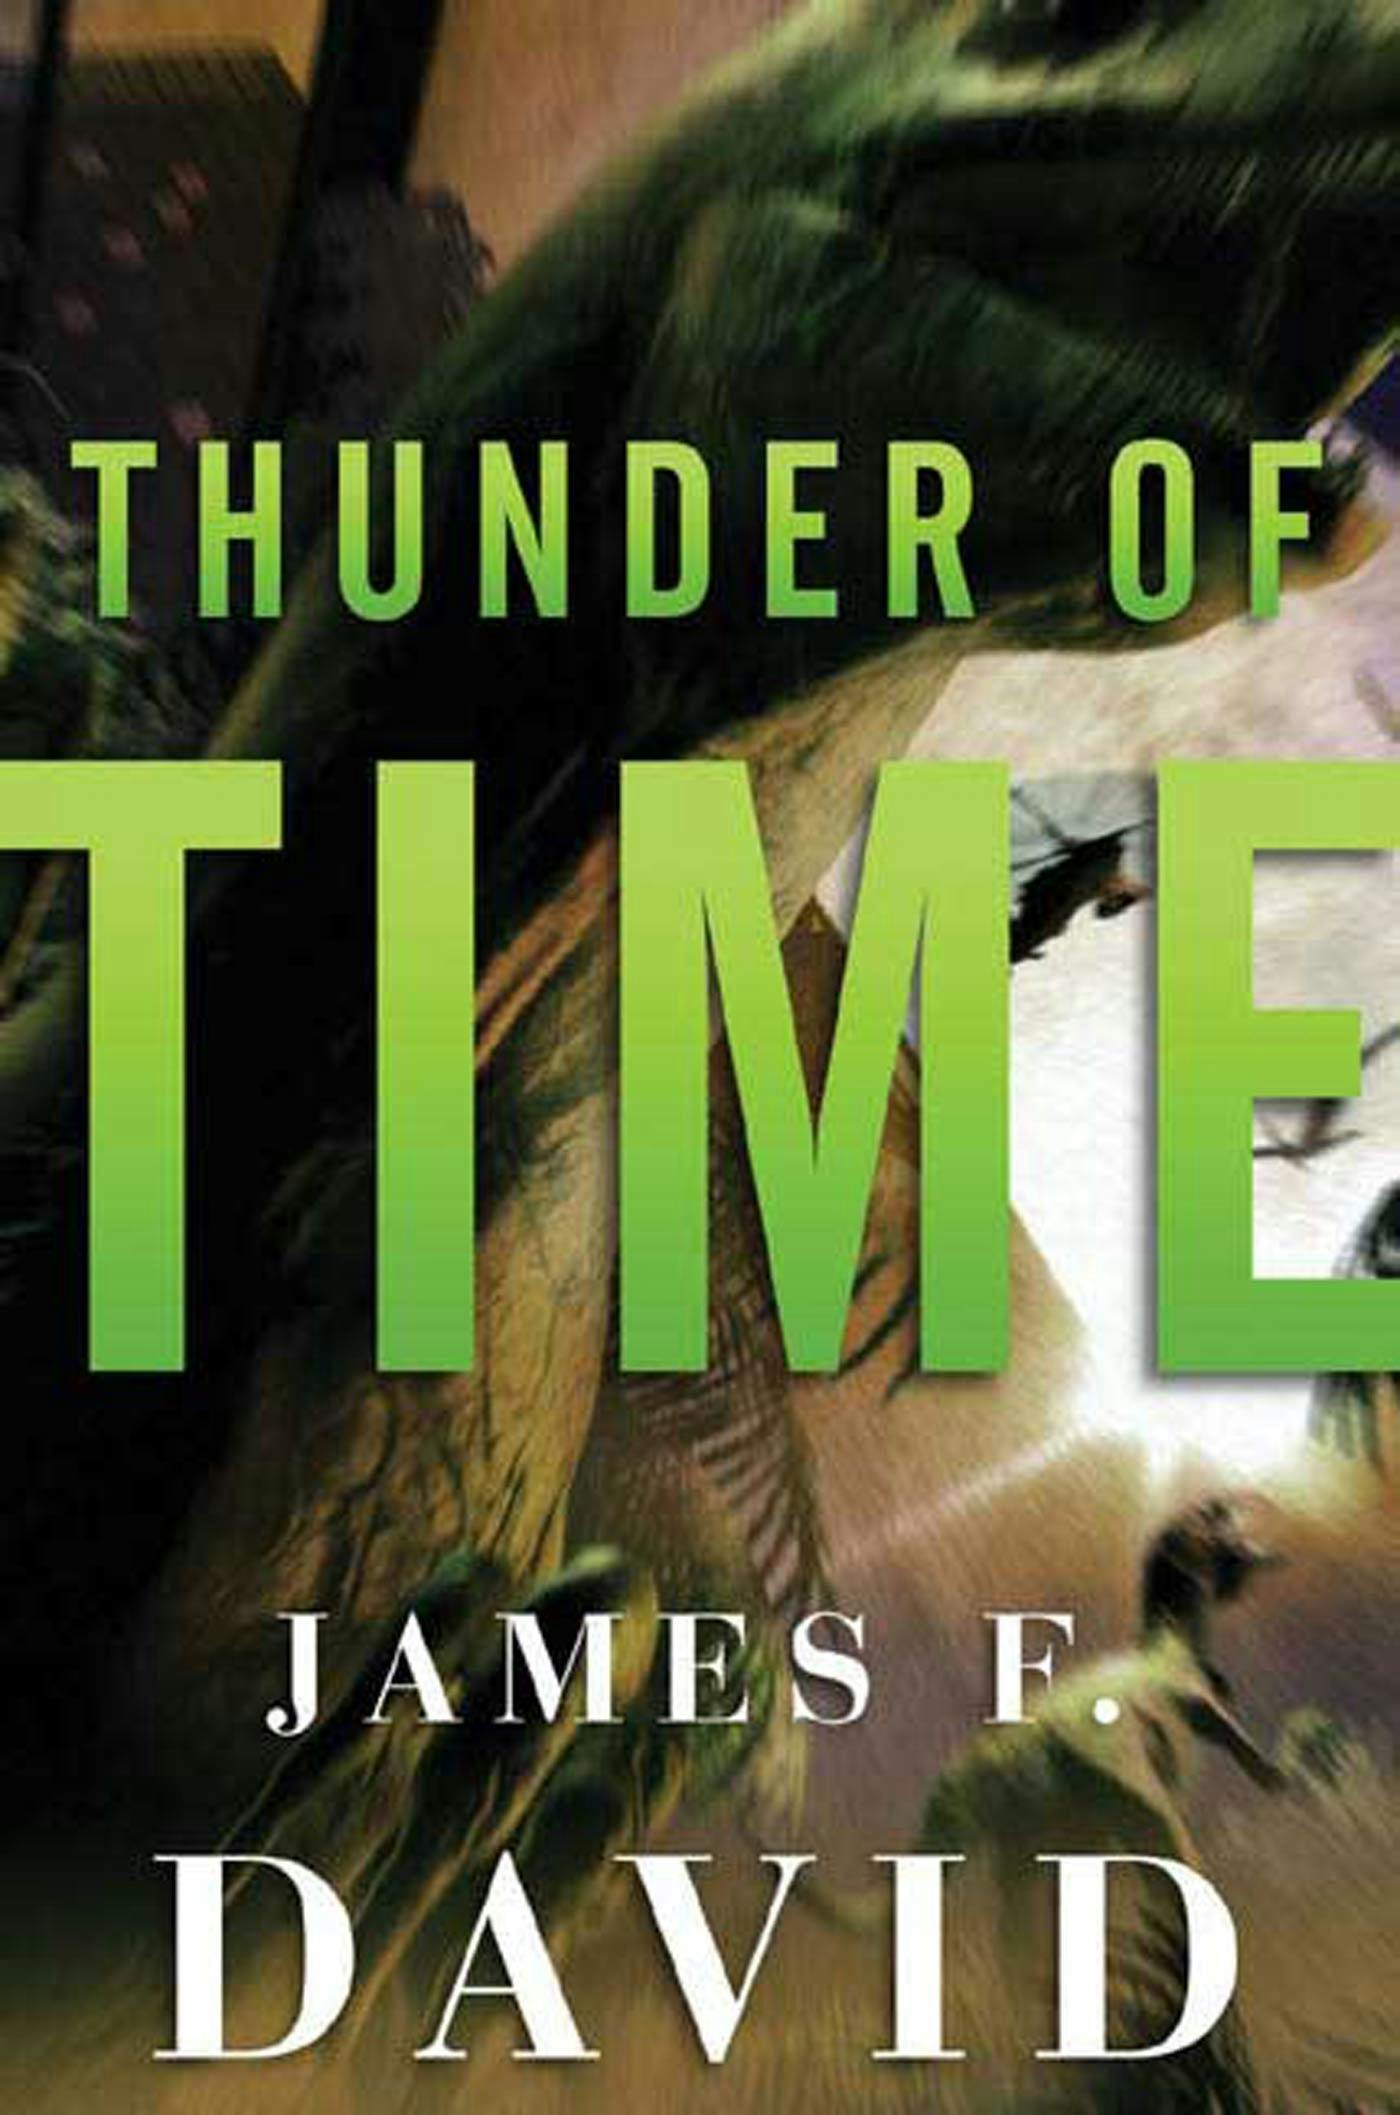 Cover for the book titled as: Thunder of Time